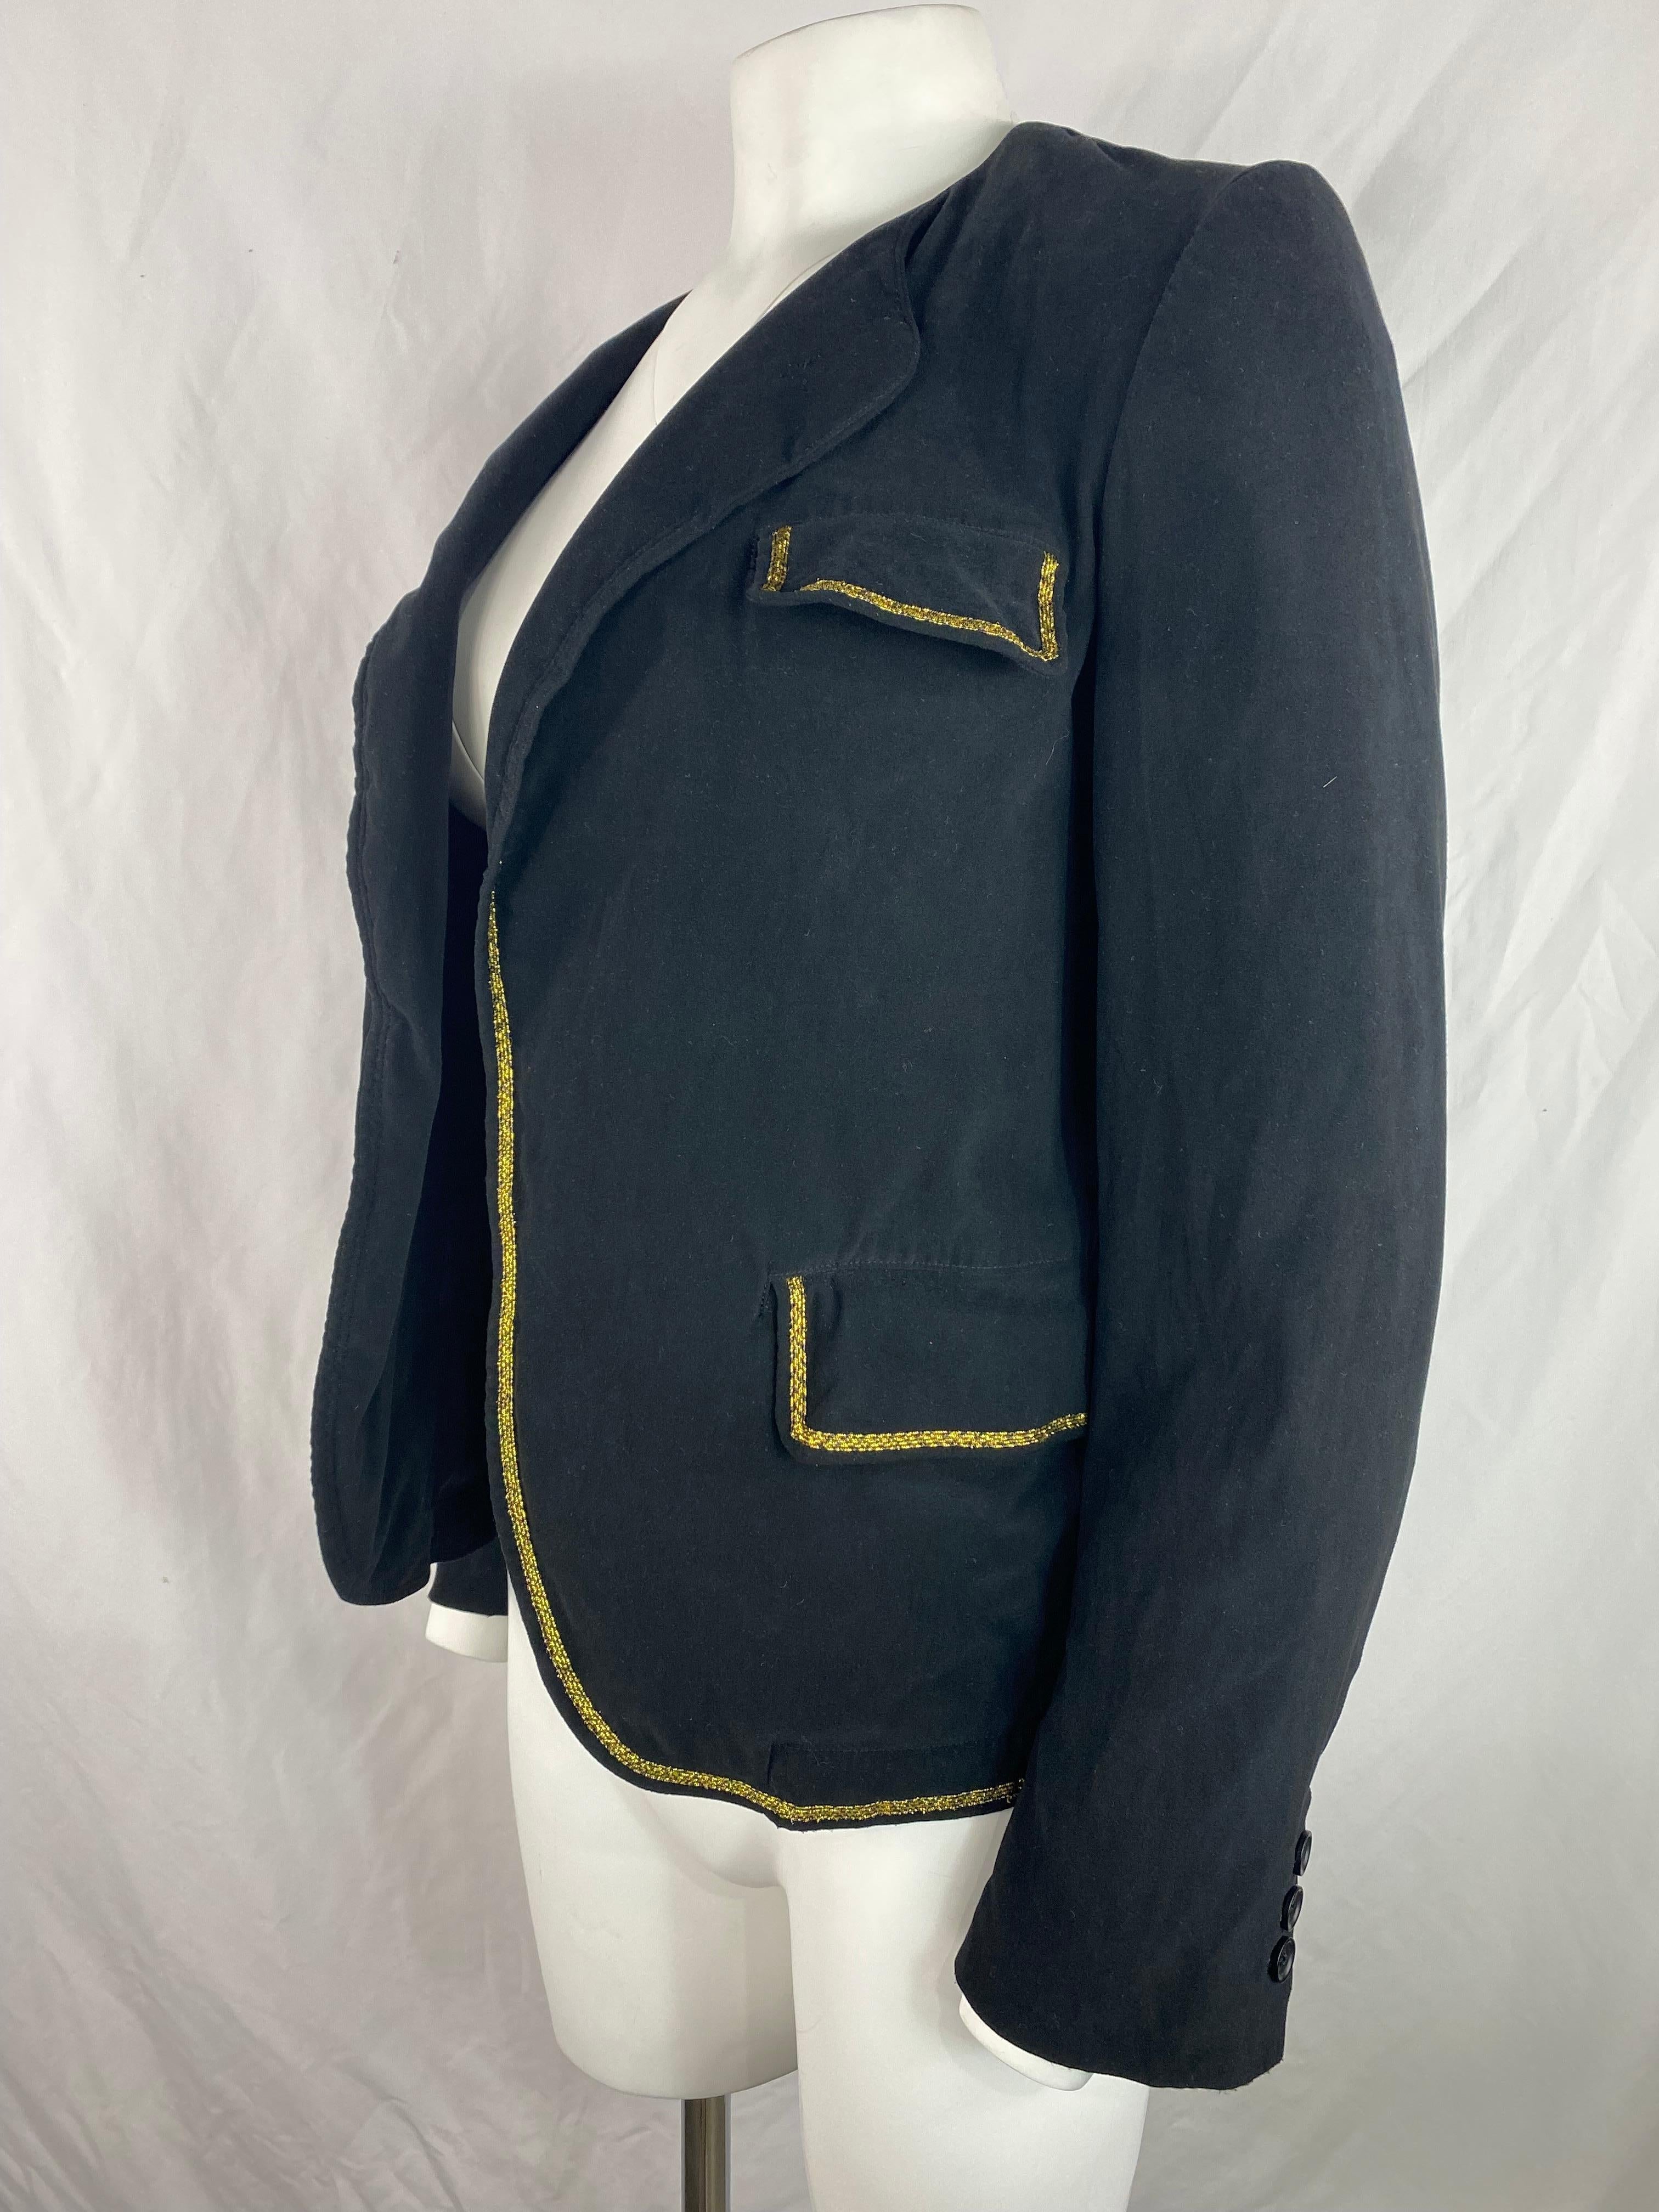 Product details:

The jacket features black velvet with gold trimming detail.